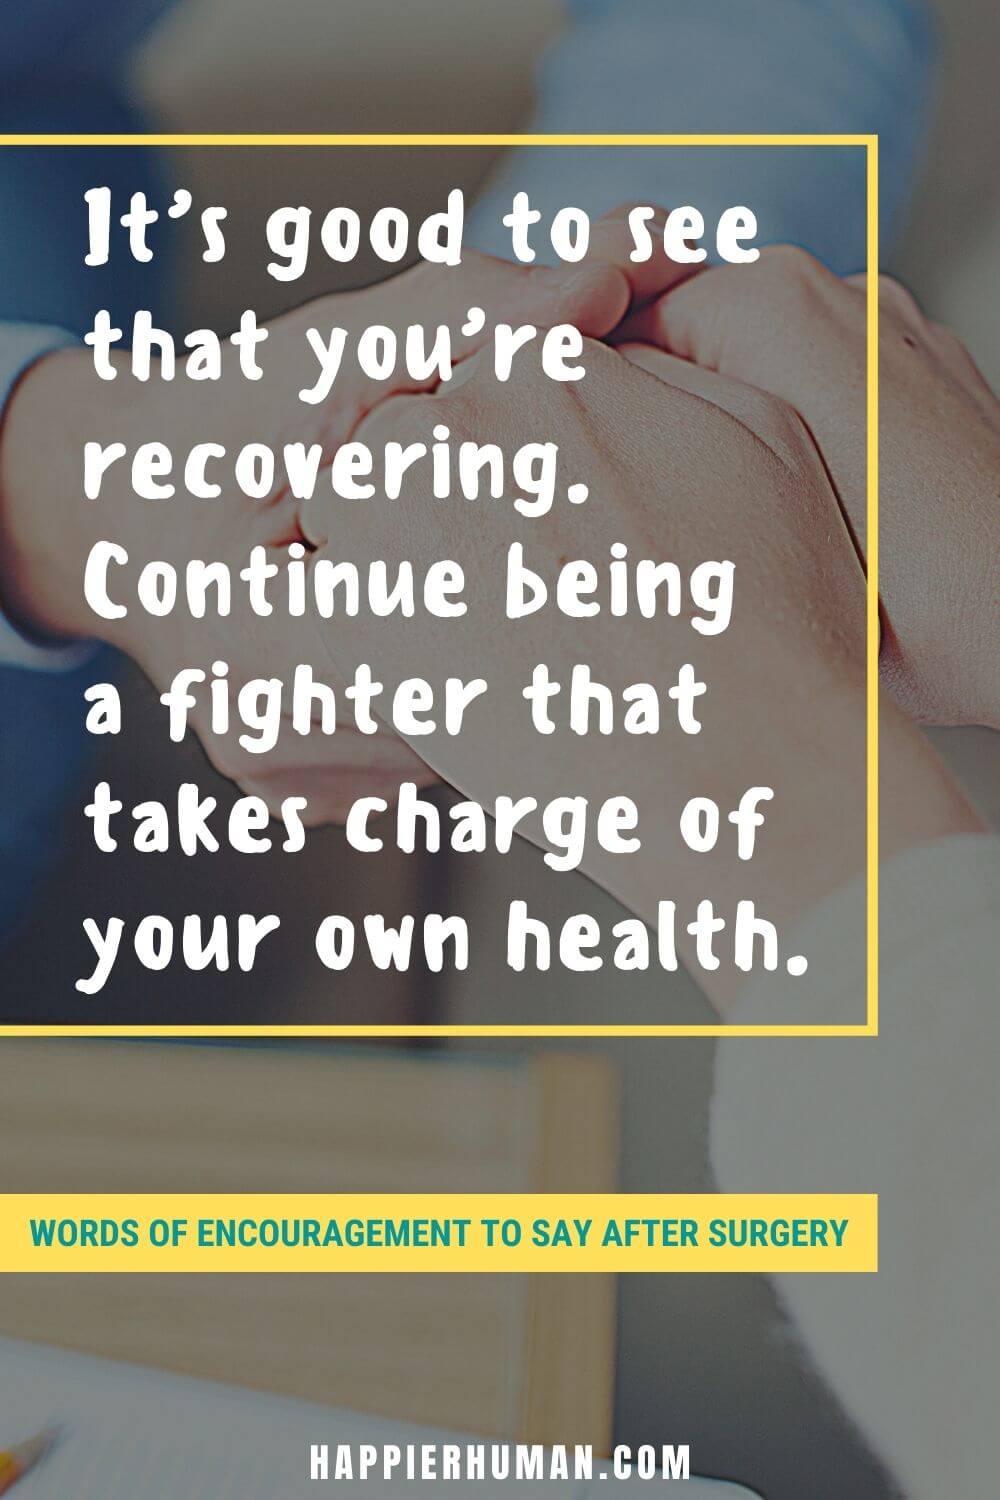 51 Words Of Encouragement To Say After Surgery 2022